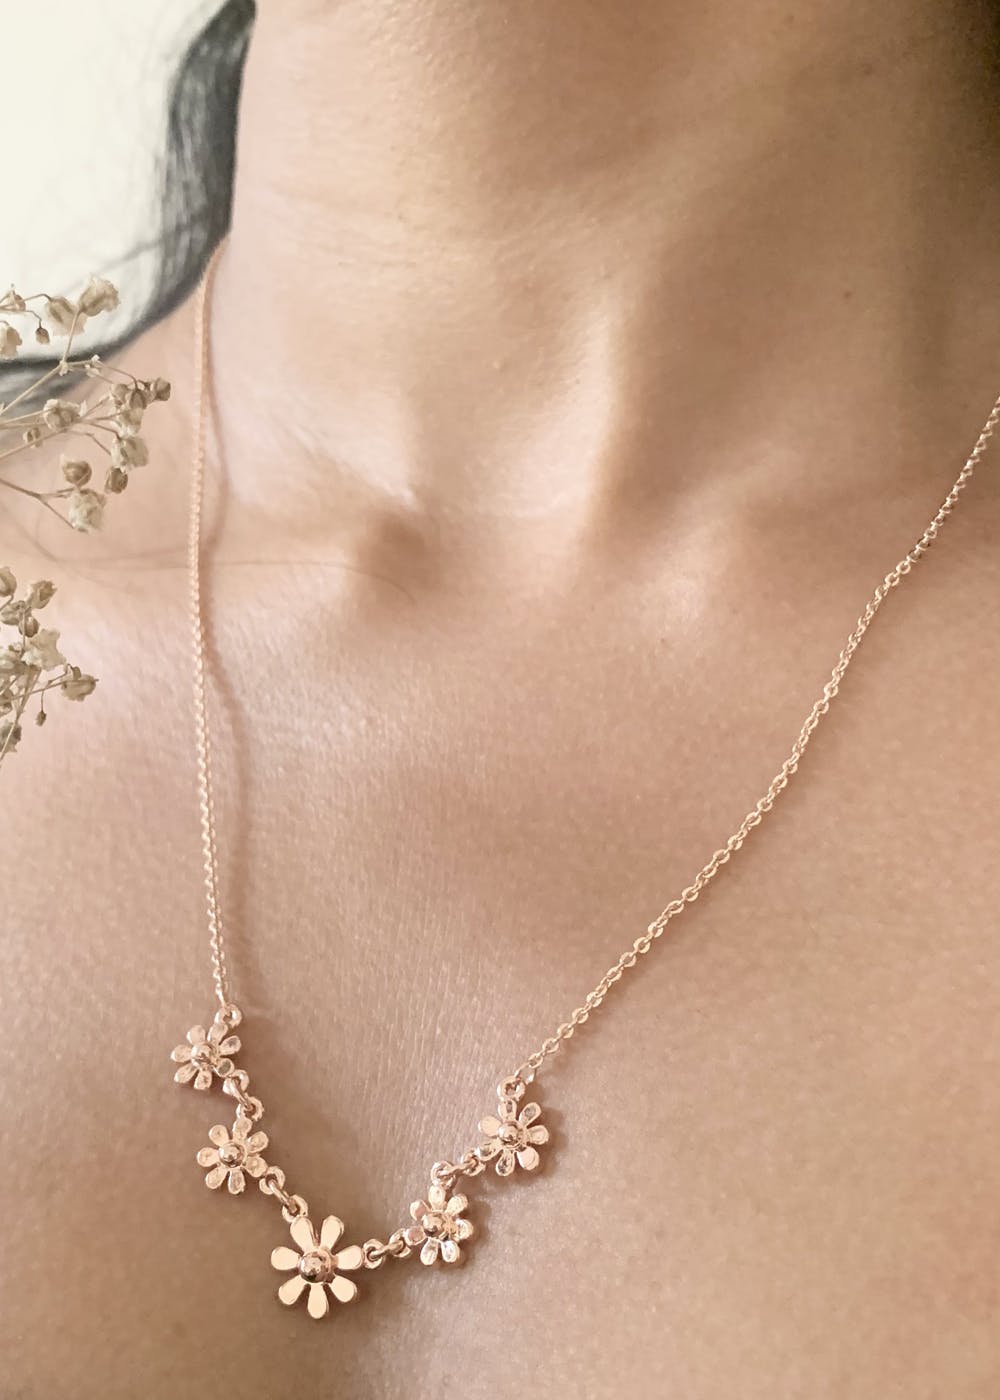 Get Rose Gold Floral Minimalistic Necklace at ₹ 788